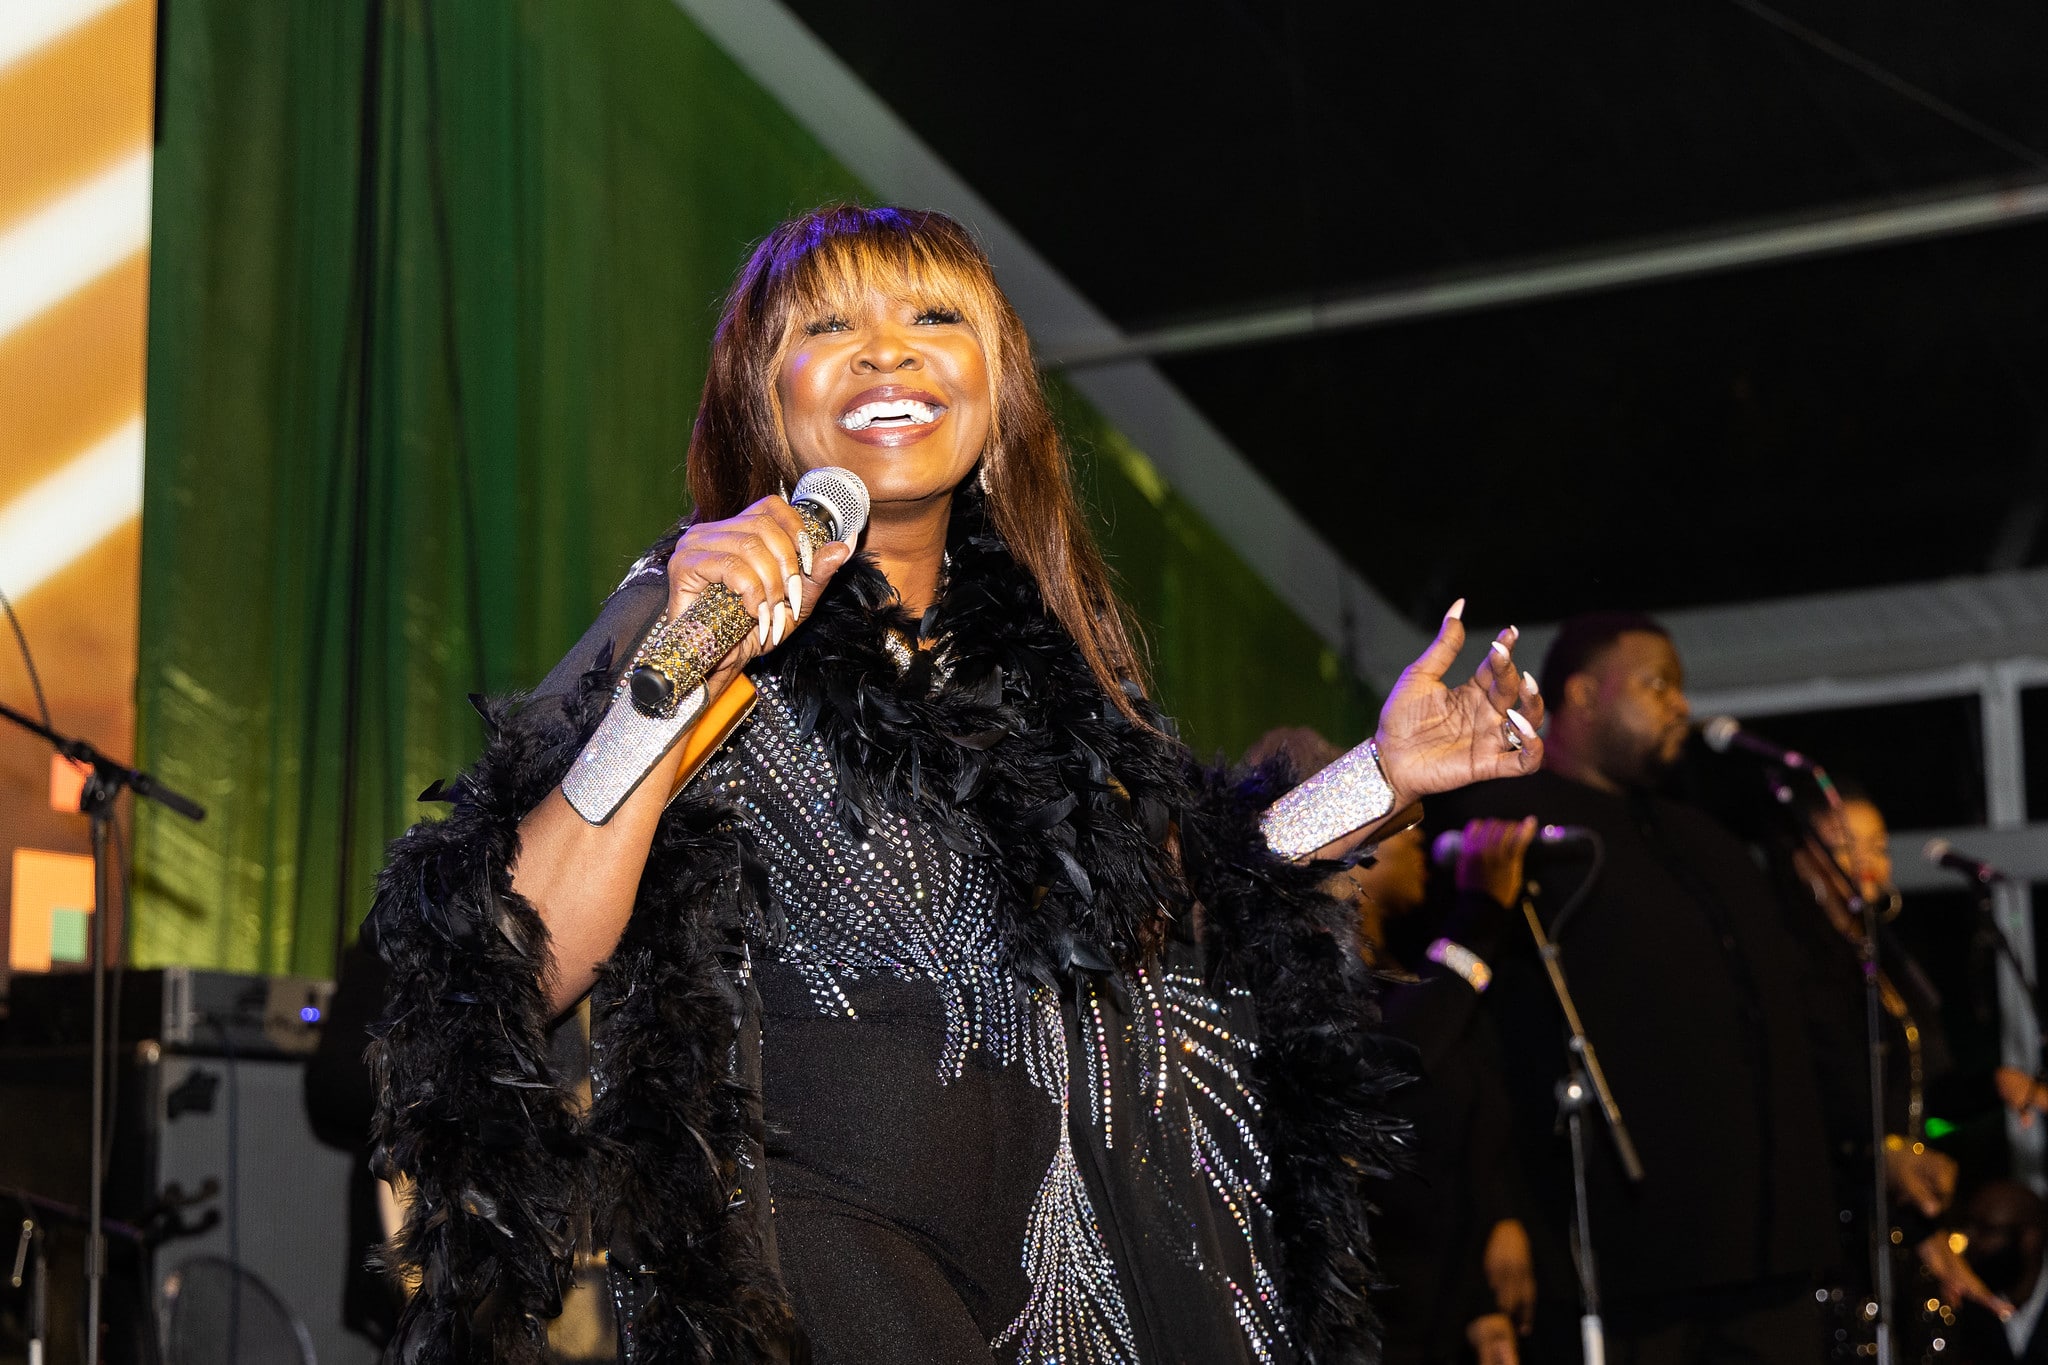 Mary Griffin performs with the Ernest Walker Band Gala on the Green® at Discovery Green in downtown Houston. February 23, 2023. Photo: Lawrence Elizabeth Knox